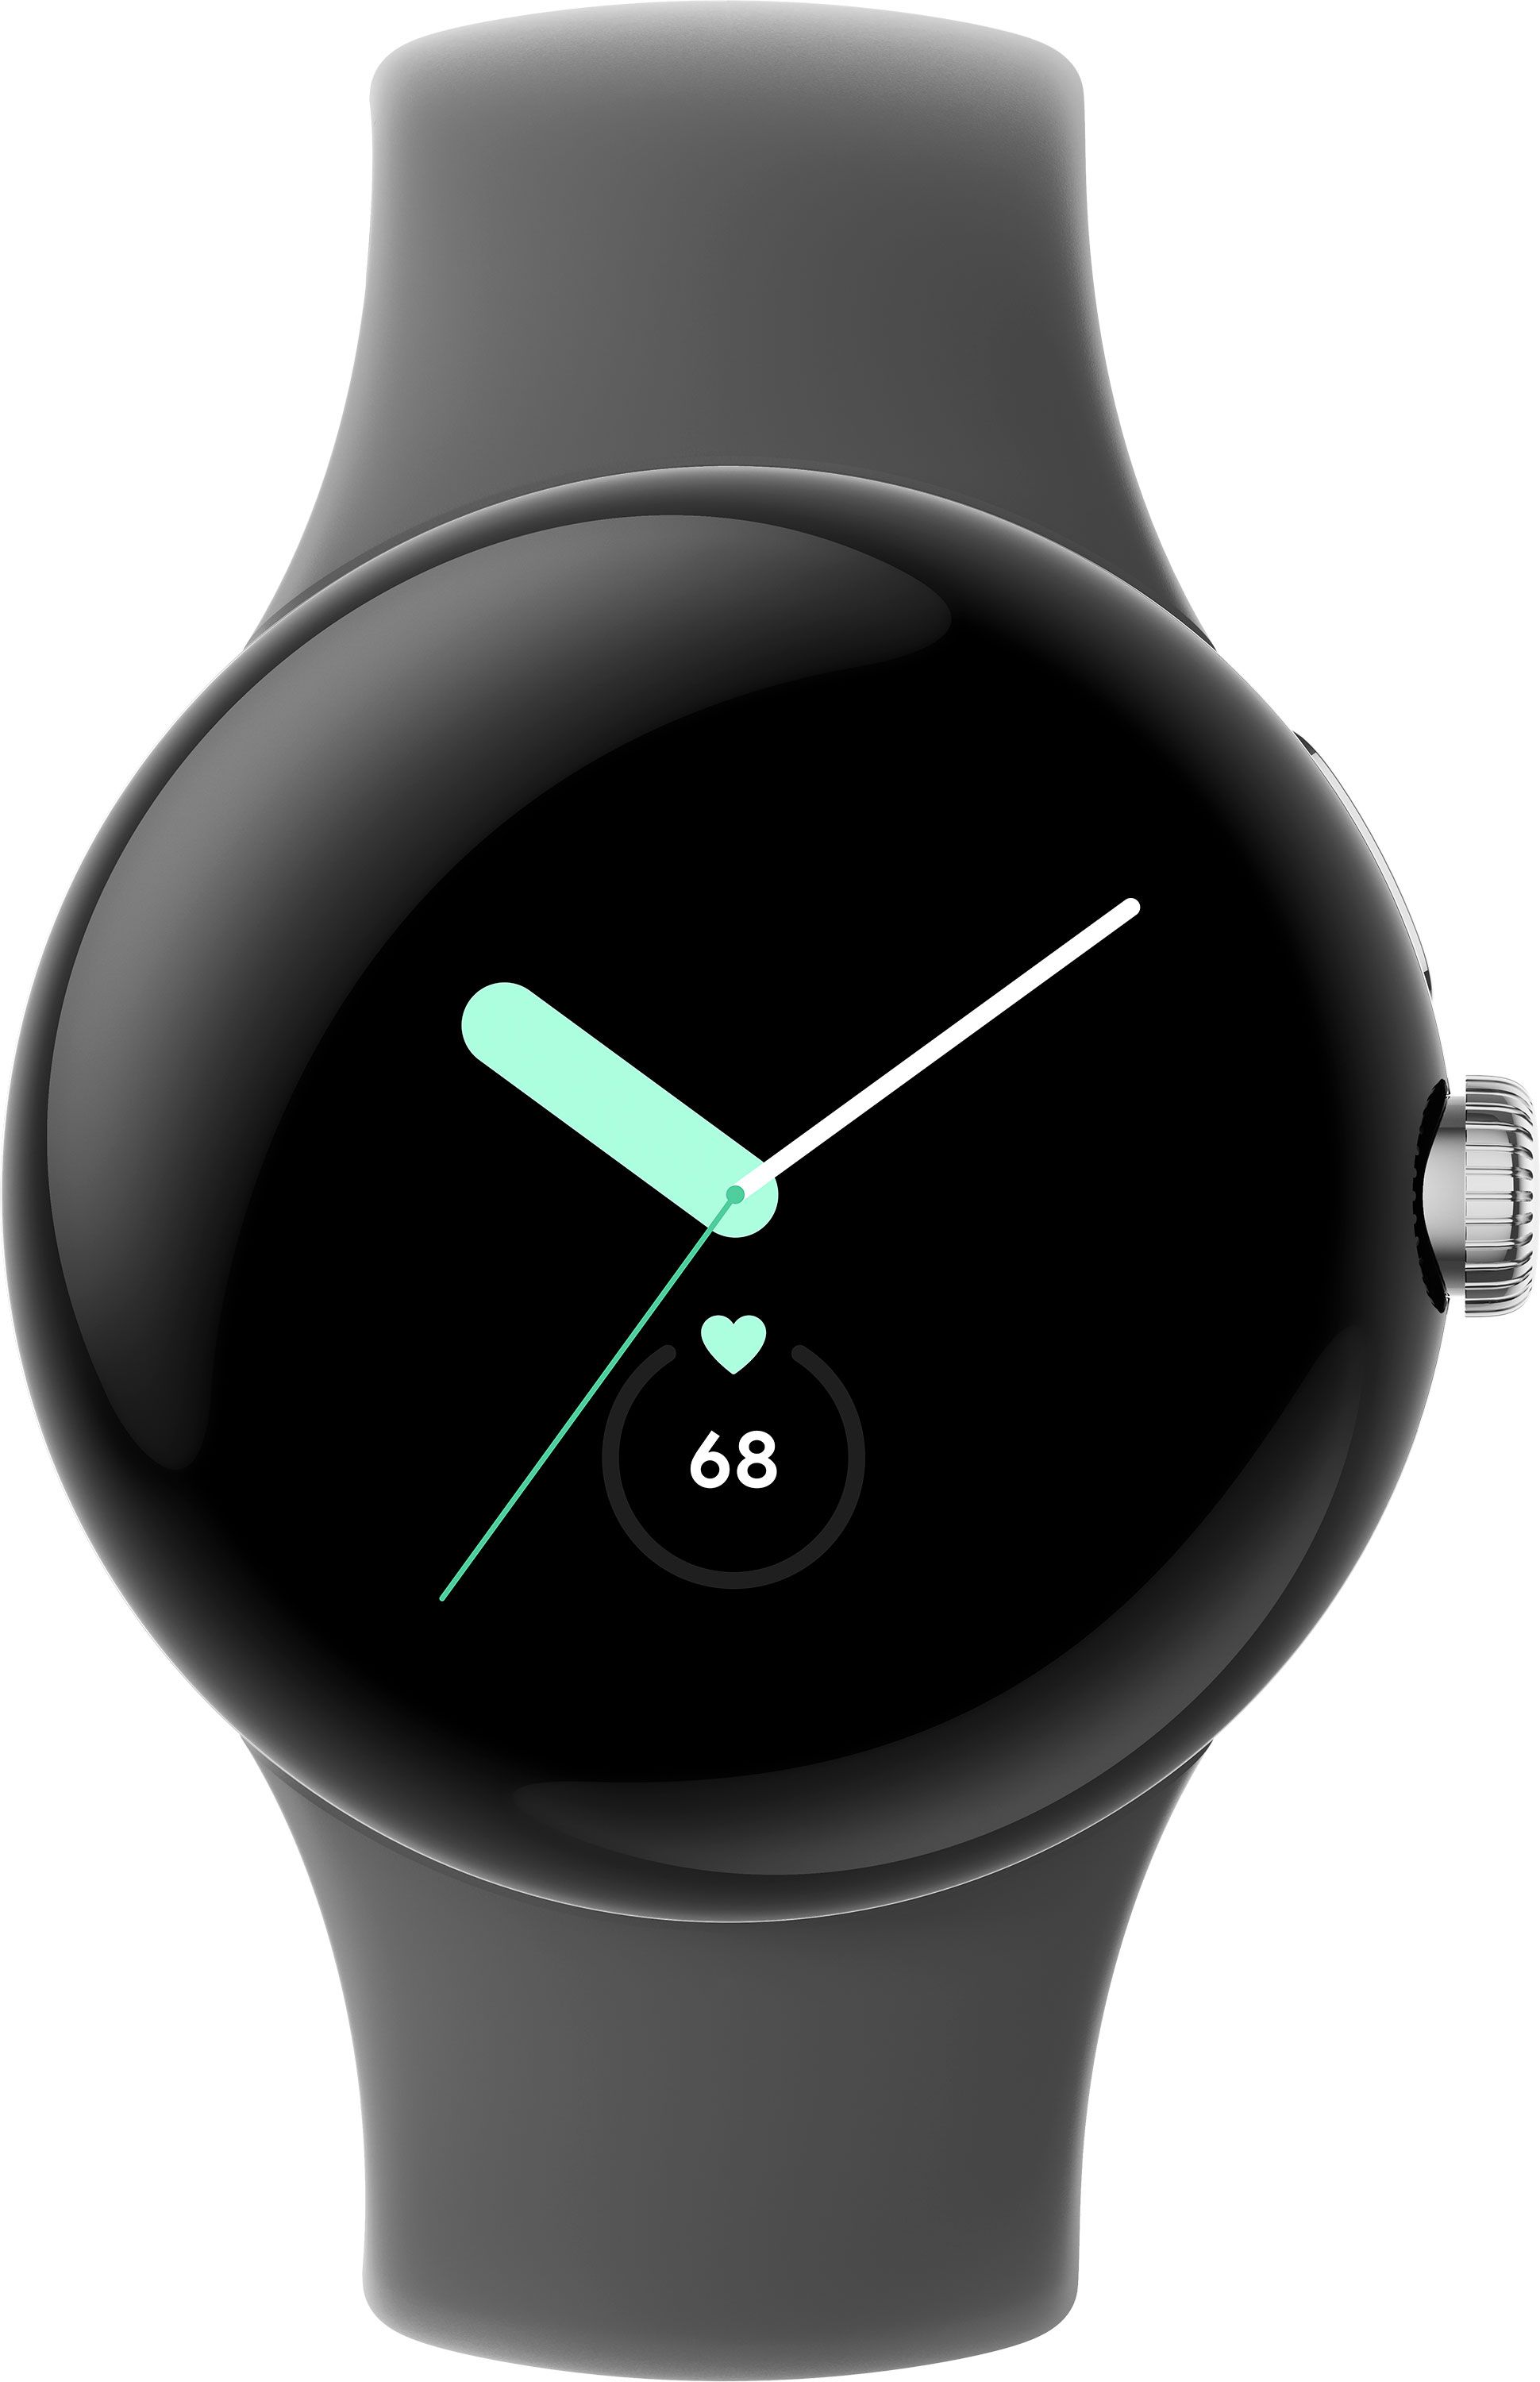 Google Pixel Watch 41mm Polished Silver Stainless Steel Case with Active Band in Charcoal, Charcoal